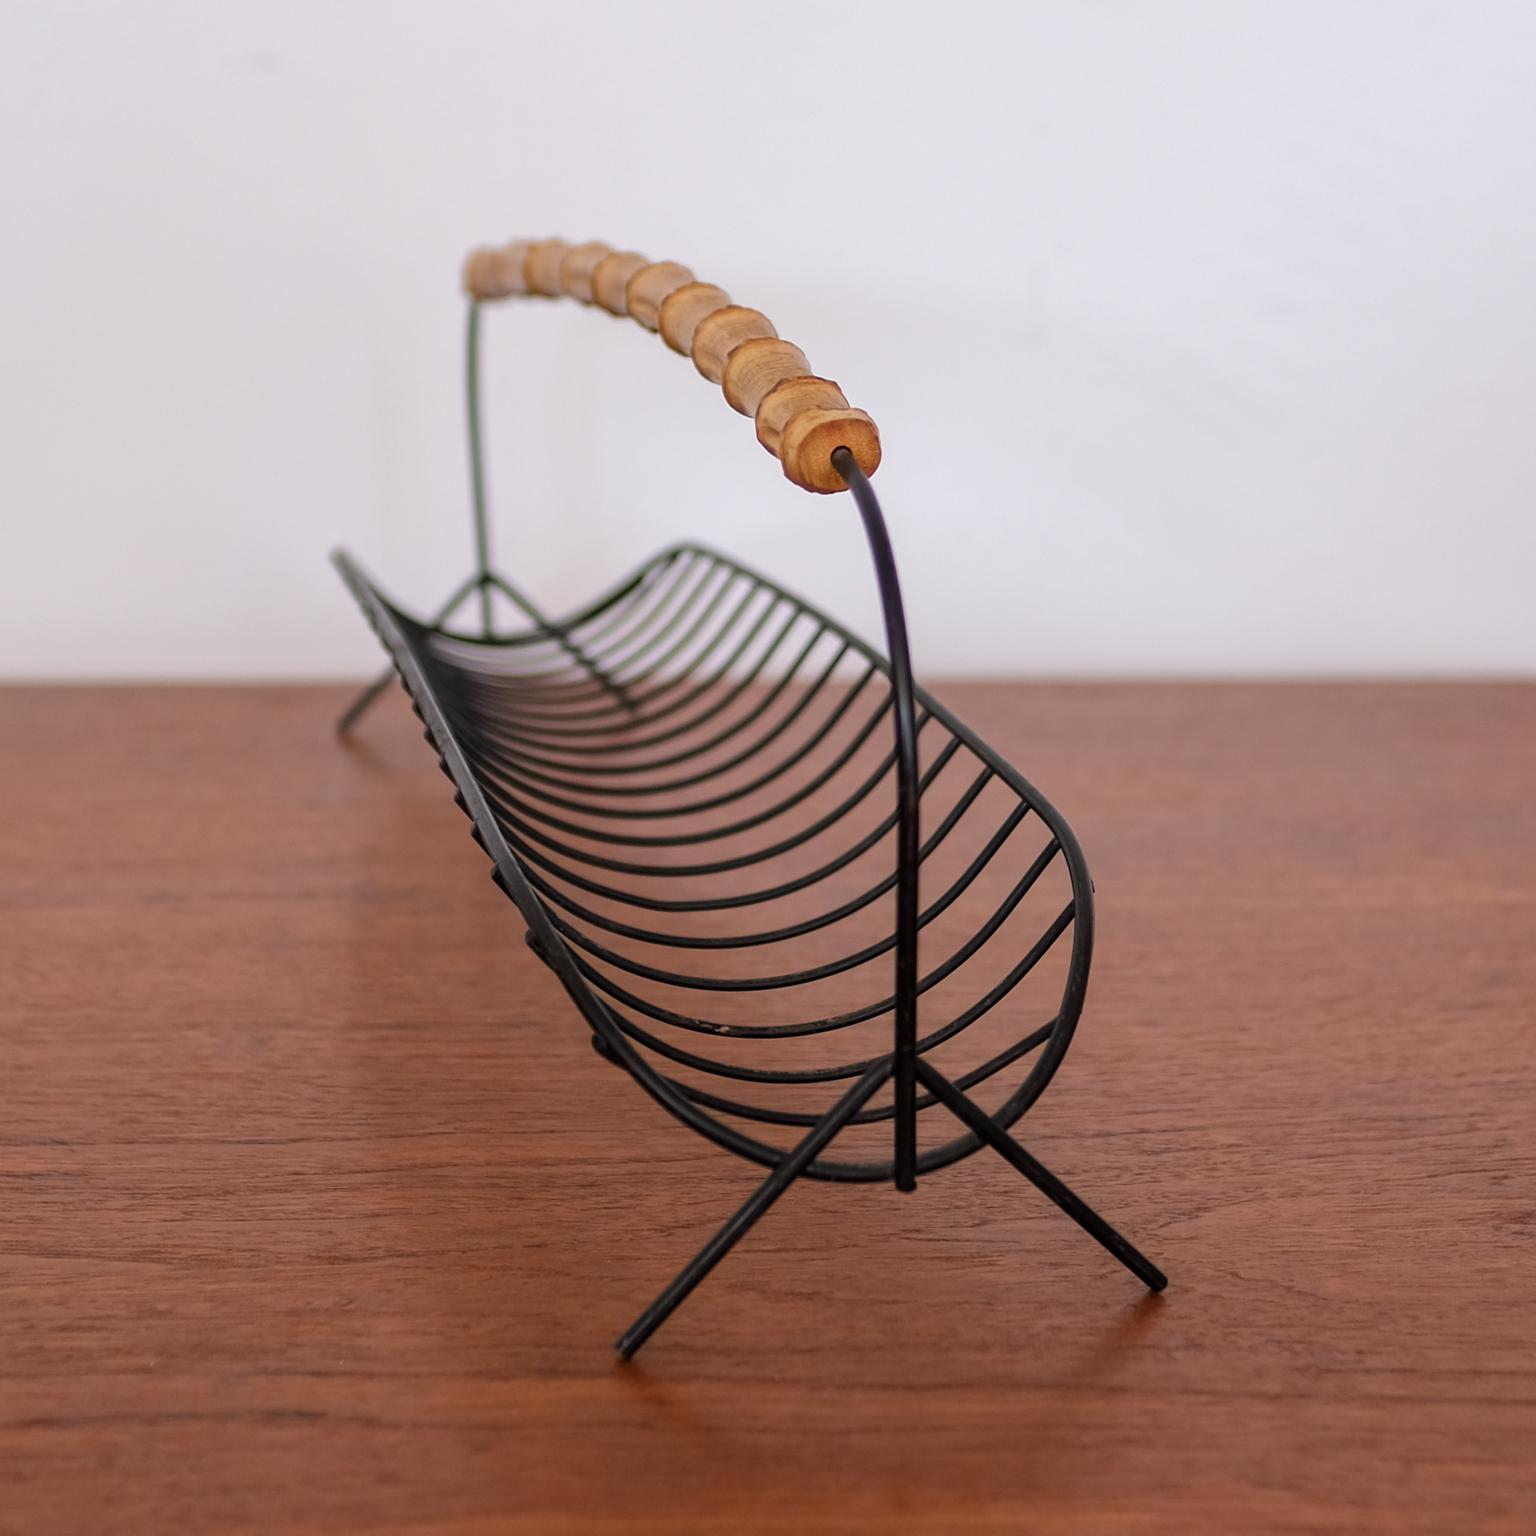 Mid-Century Modern Wire Fruit Basket with Cane Handle, 1950s For Sale